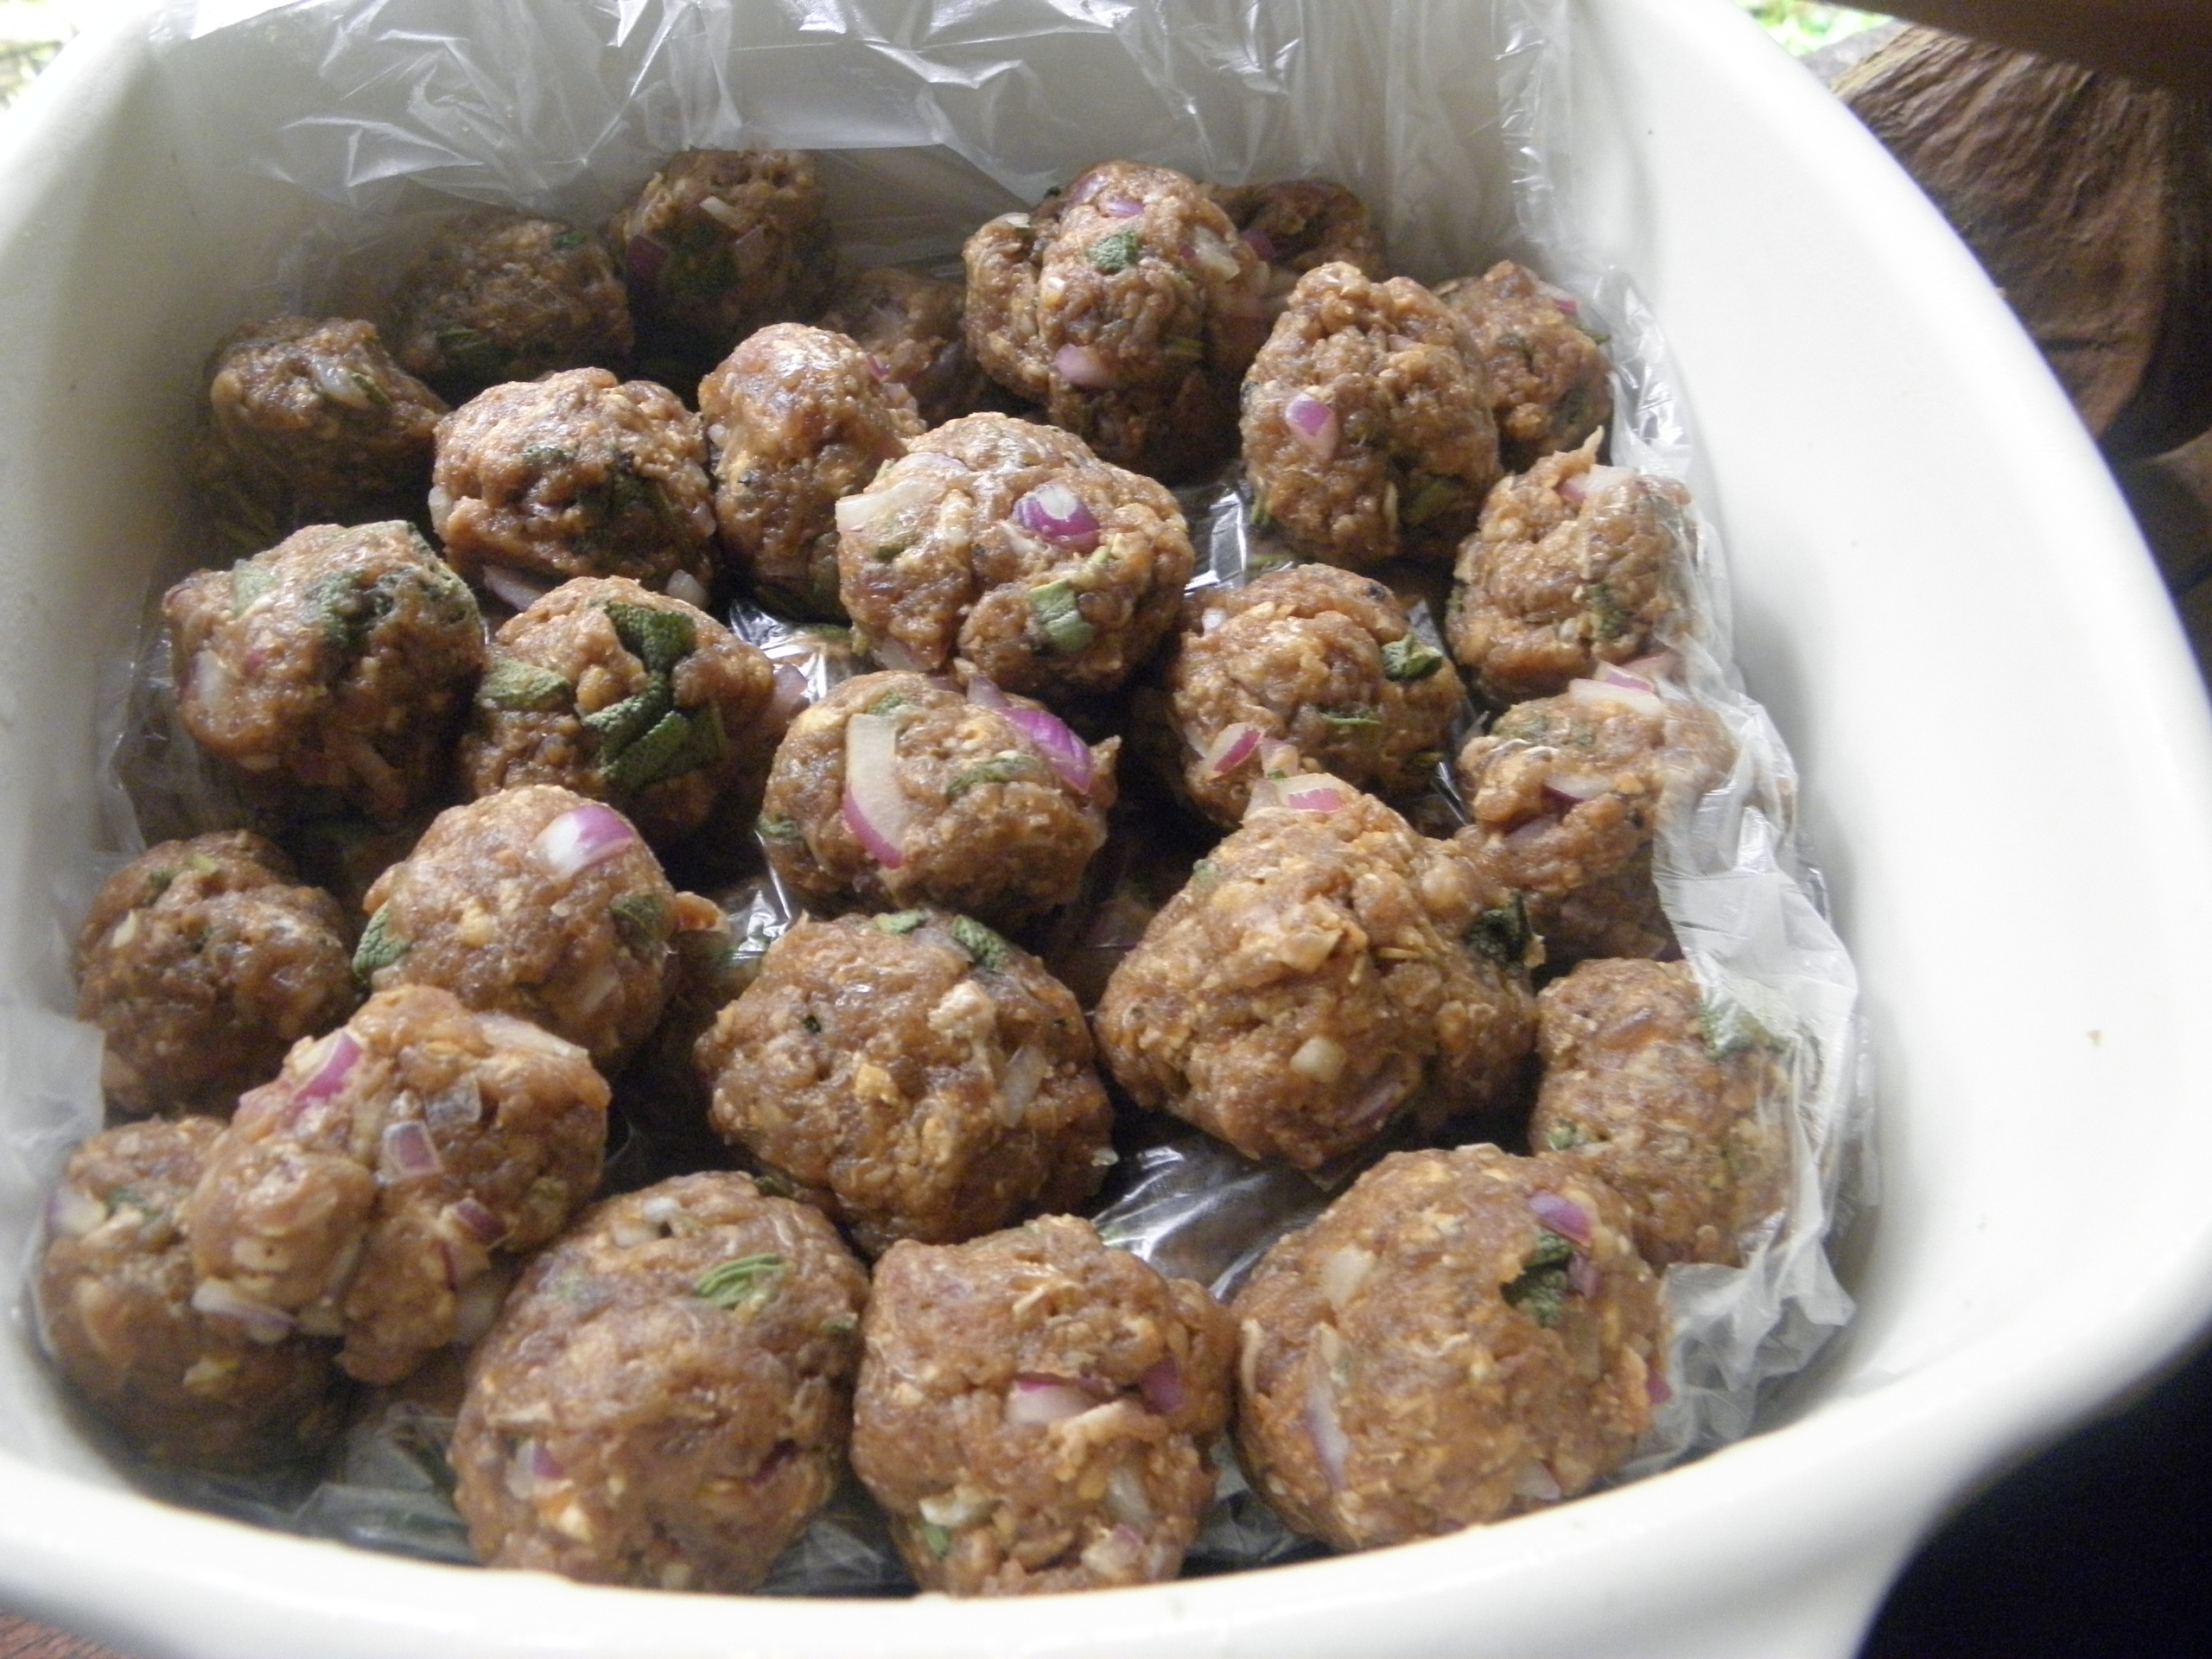 I also made meat balls using the ground pork meat. Home-made meat balls is great because you can flavour it with the herbs and spices that you like and because they are mildly cured, they can keep for some time and can be cooked with vegetables, stews and soups.